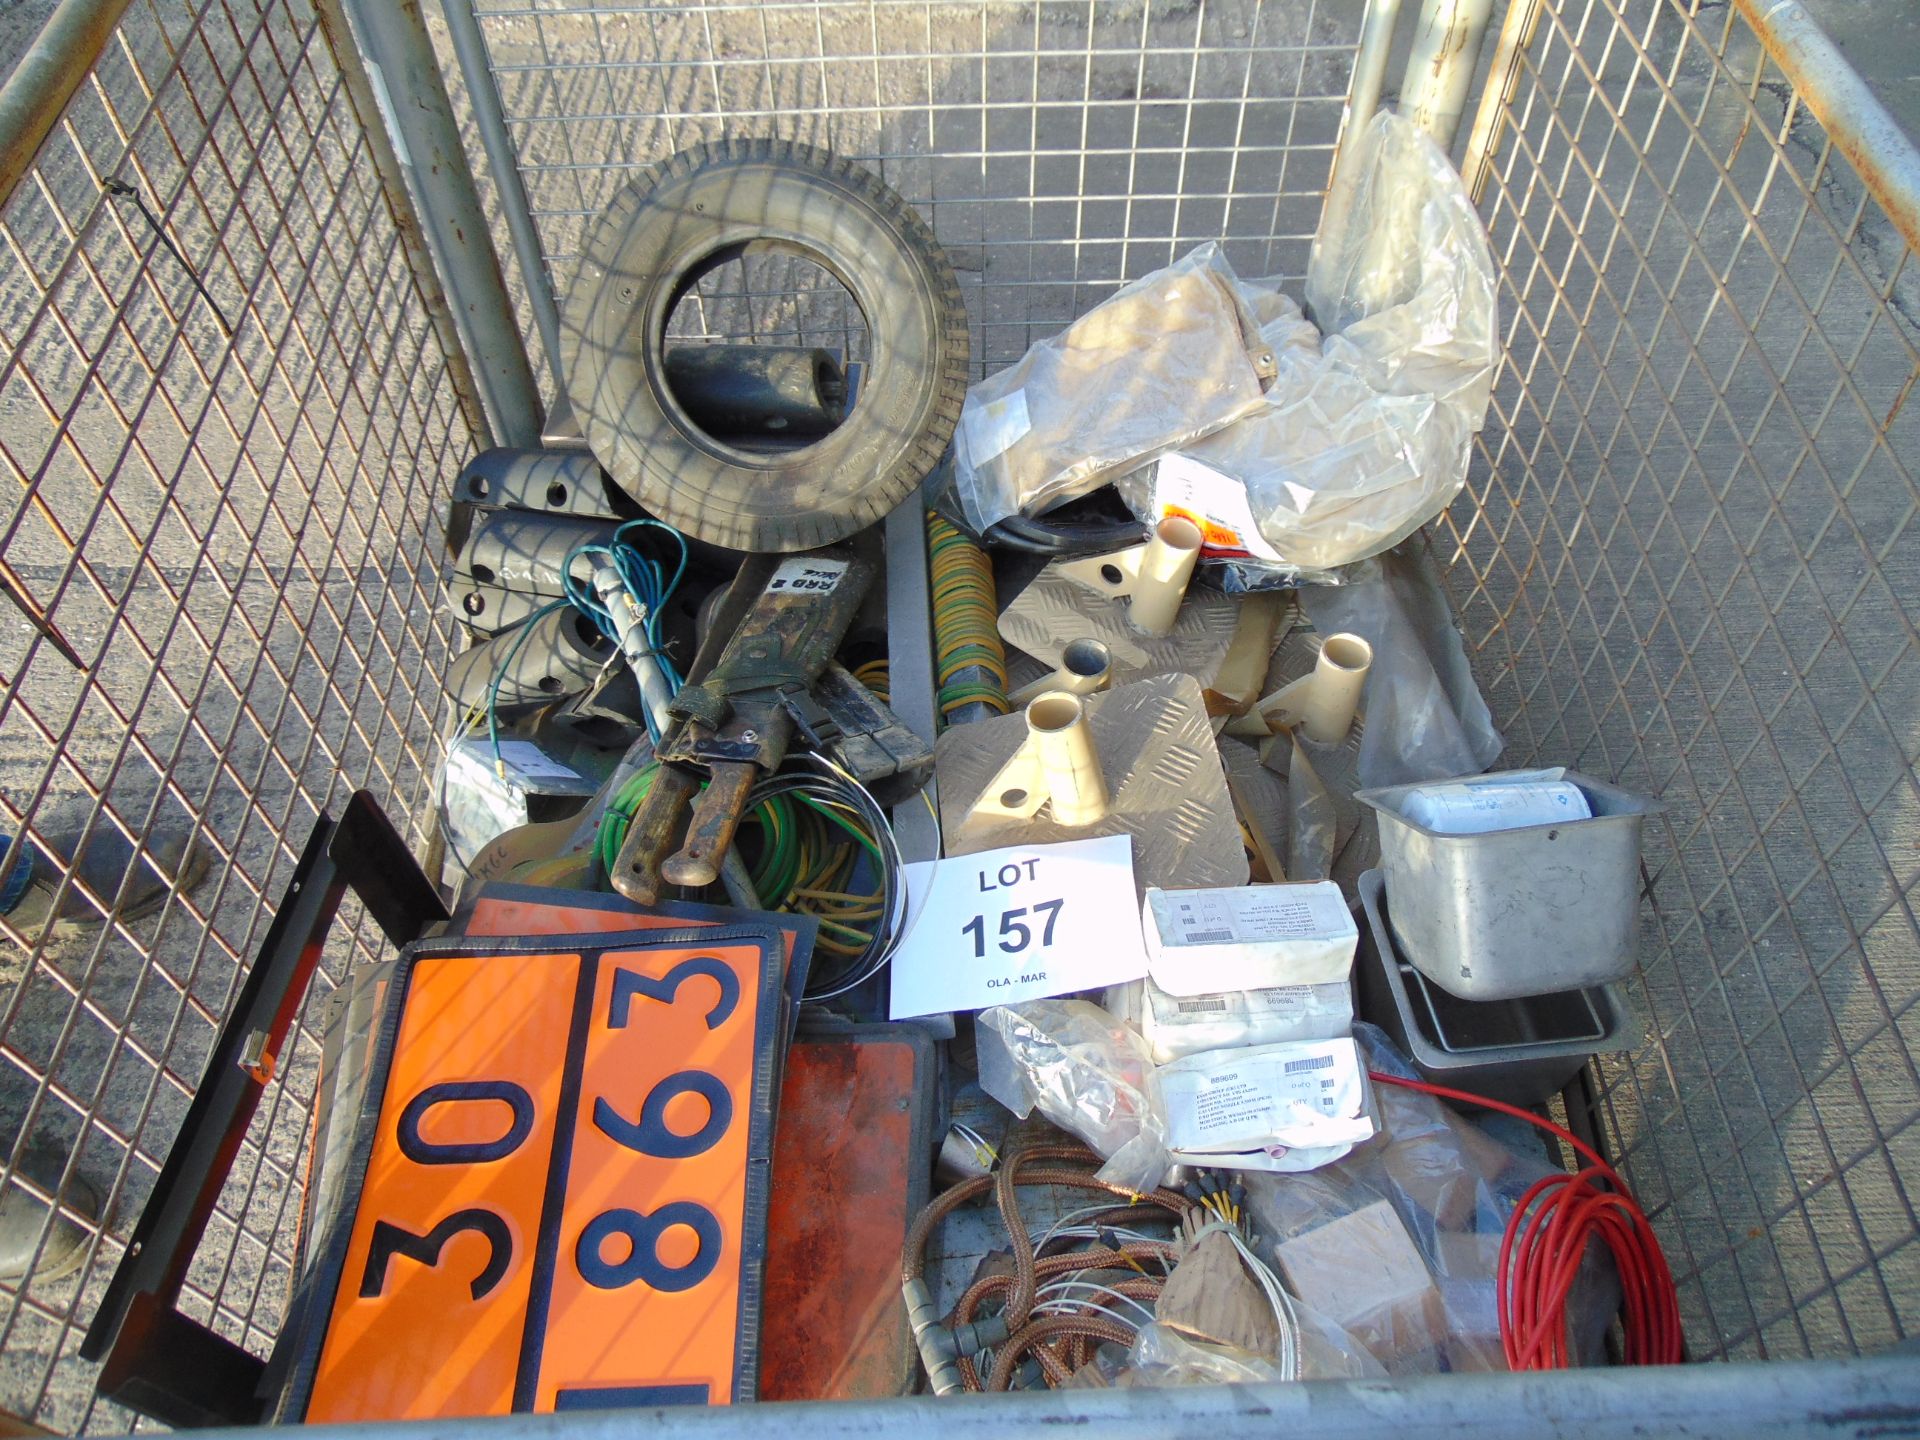 1X STILLAGE OF VEHICLES SPARES INCLUDING ANTENNA BASES, WIRING HARNESS, MARKER BOARDS, ETC,ETC - Image 2 of 8